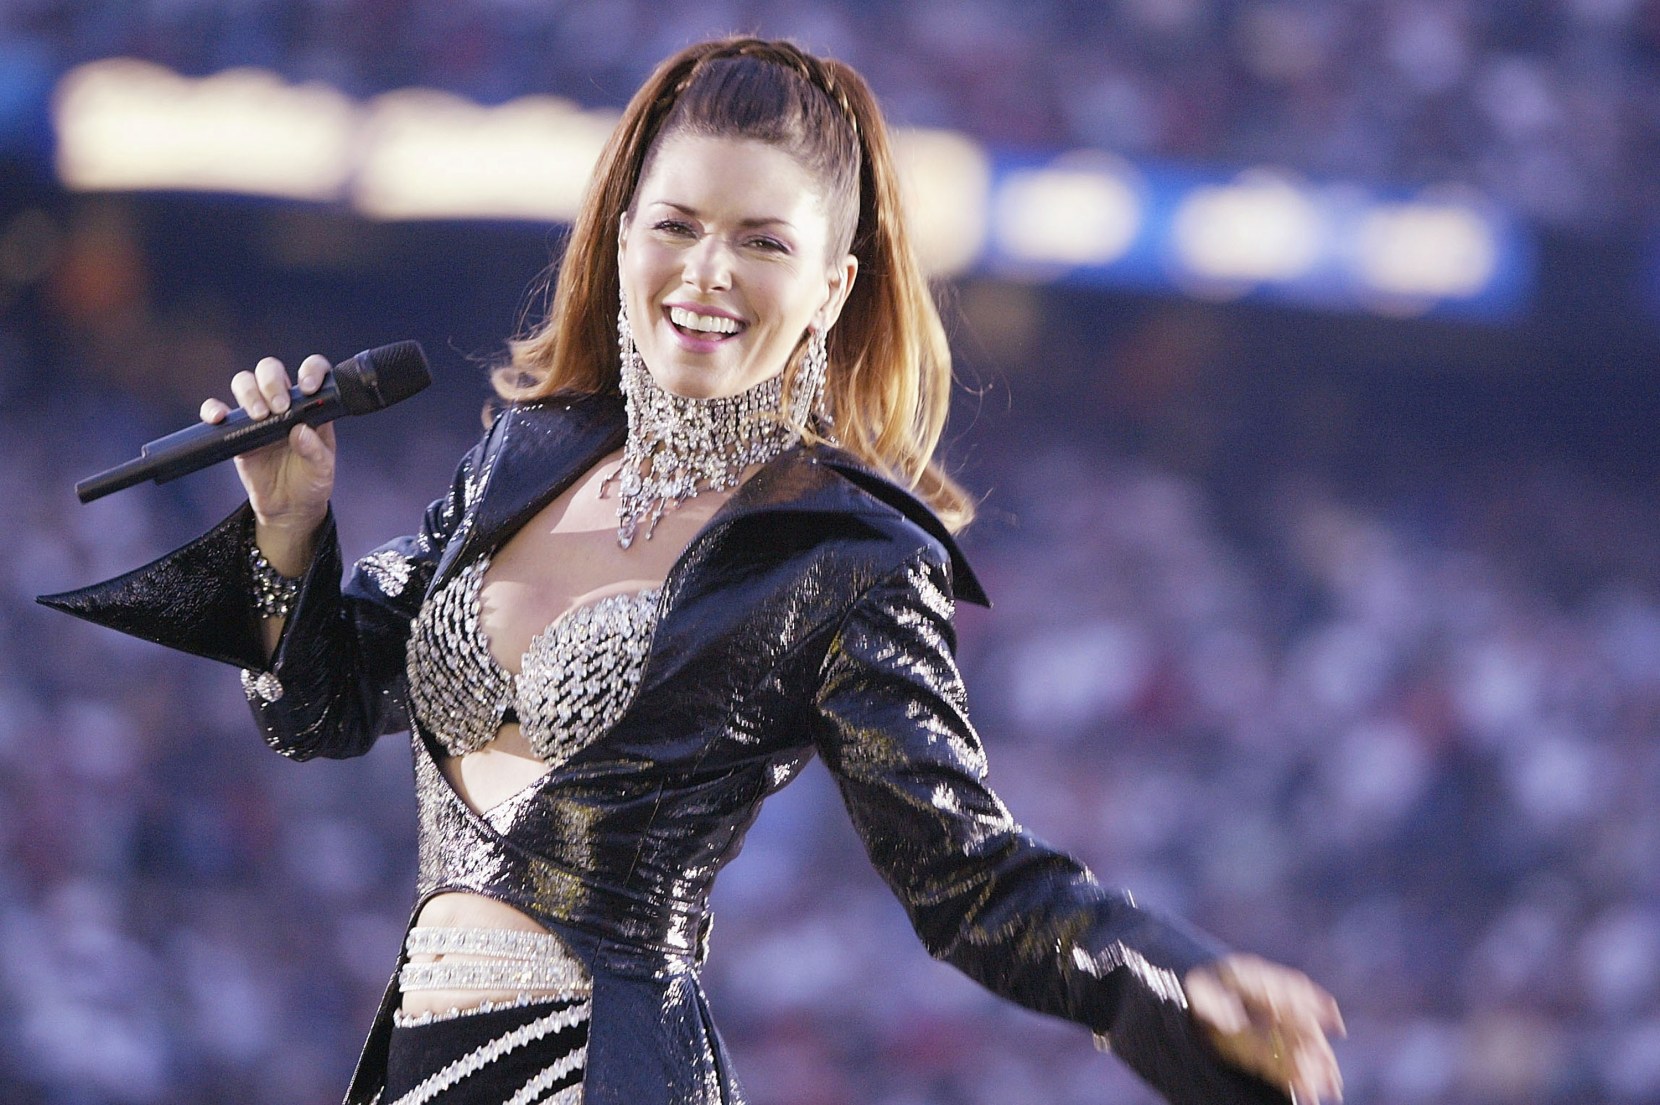 Shania Twain Reveals She Thought She "Would Never Sing Again" After